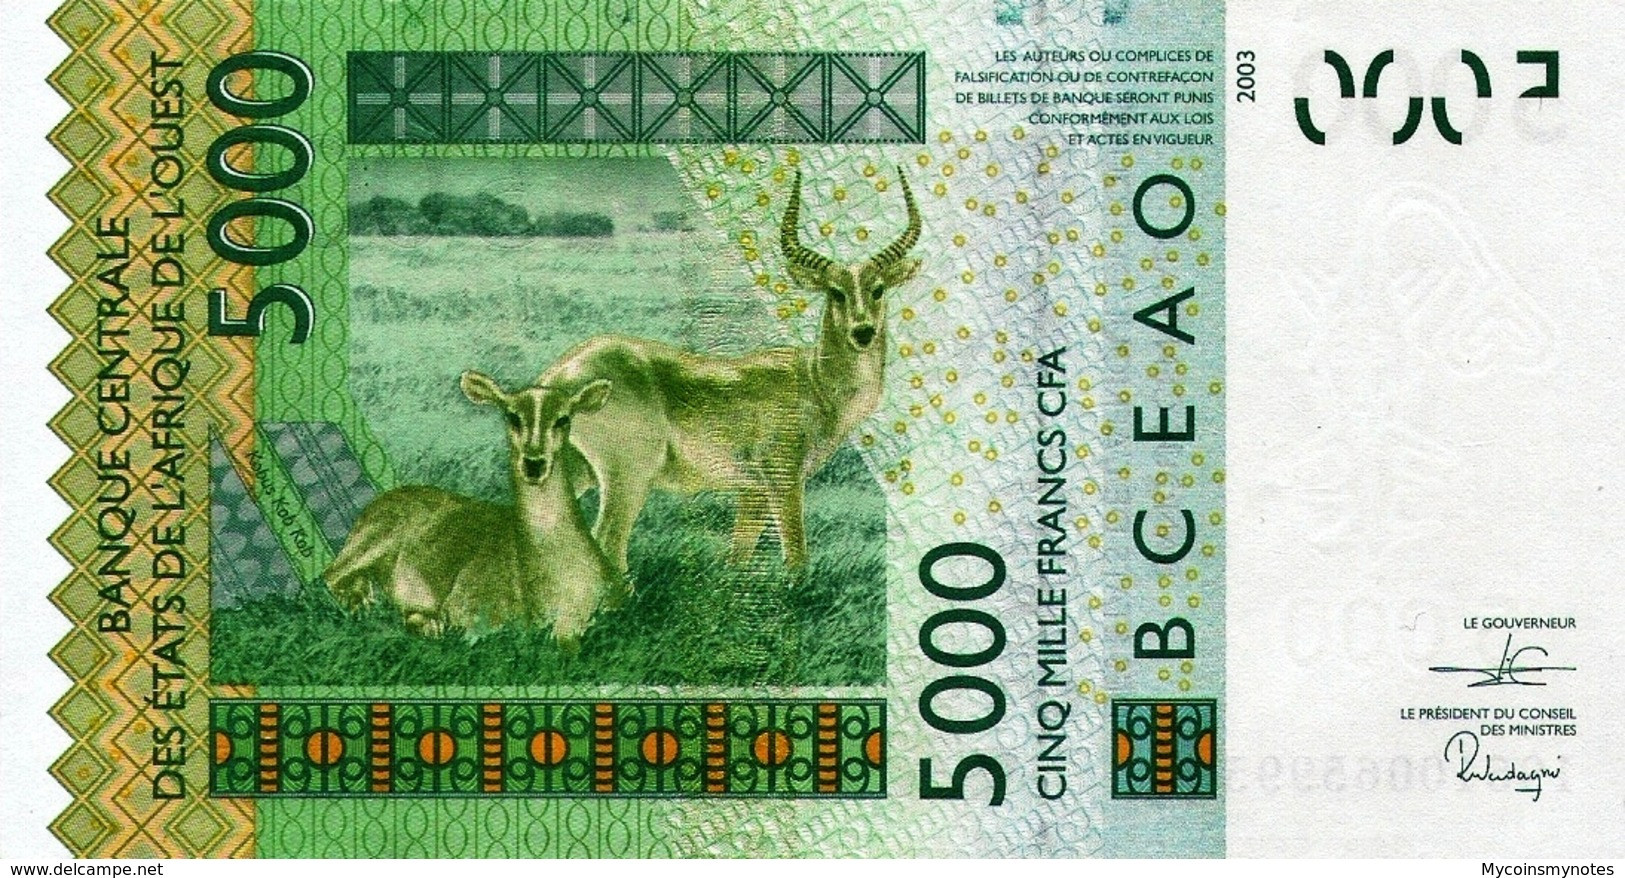 WEST AFRICAN STATES, Senegal,5000, 2019, Code K, P-NEW "Not Listed In Catalog", UNC - West African States